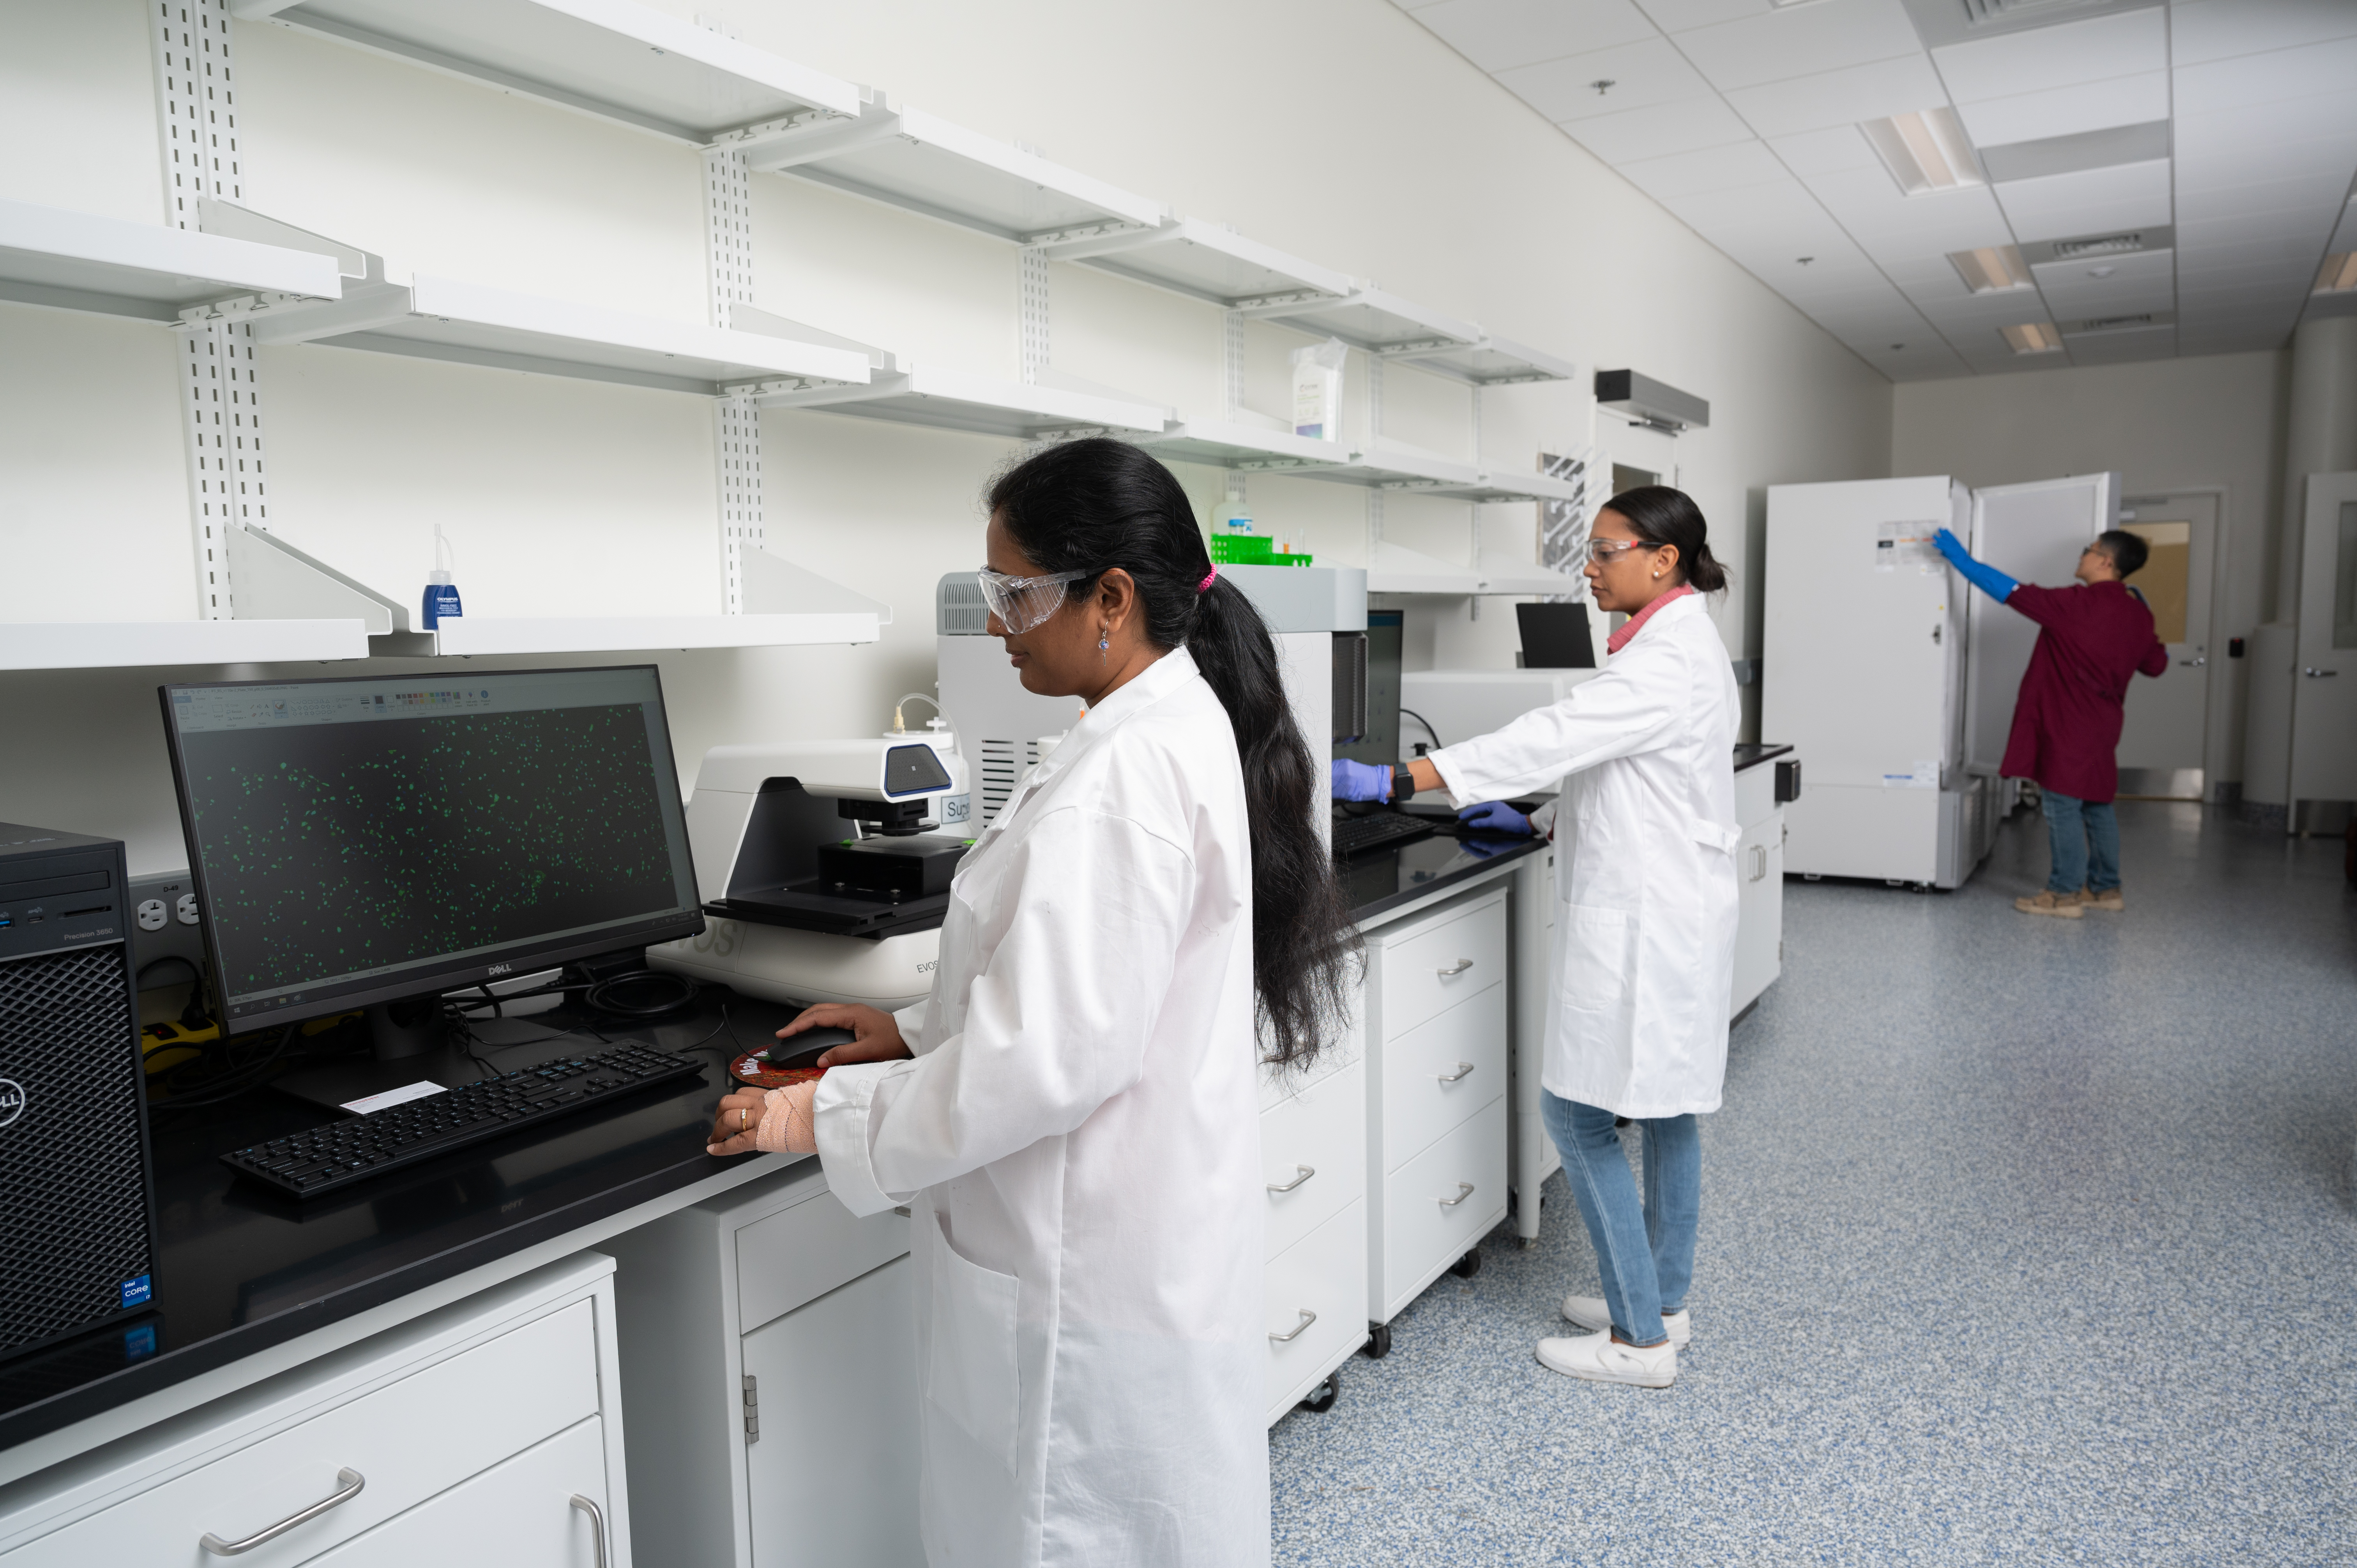 BioSpark Labs' members access shared equipment at no additional cost per usage. Featured equipment in this photo include EVOS M7000 fluorescent imaging system, Cytek Northern Lights 24-color spectral flow cytometry system, BioTek Synergy H1 microplate reader, and TSX -80C freezers. 
